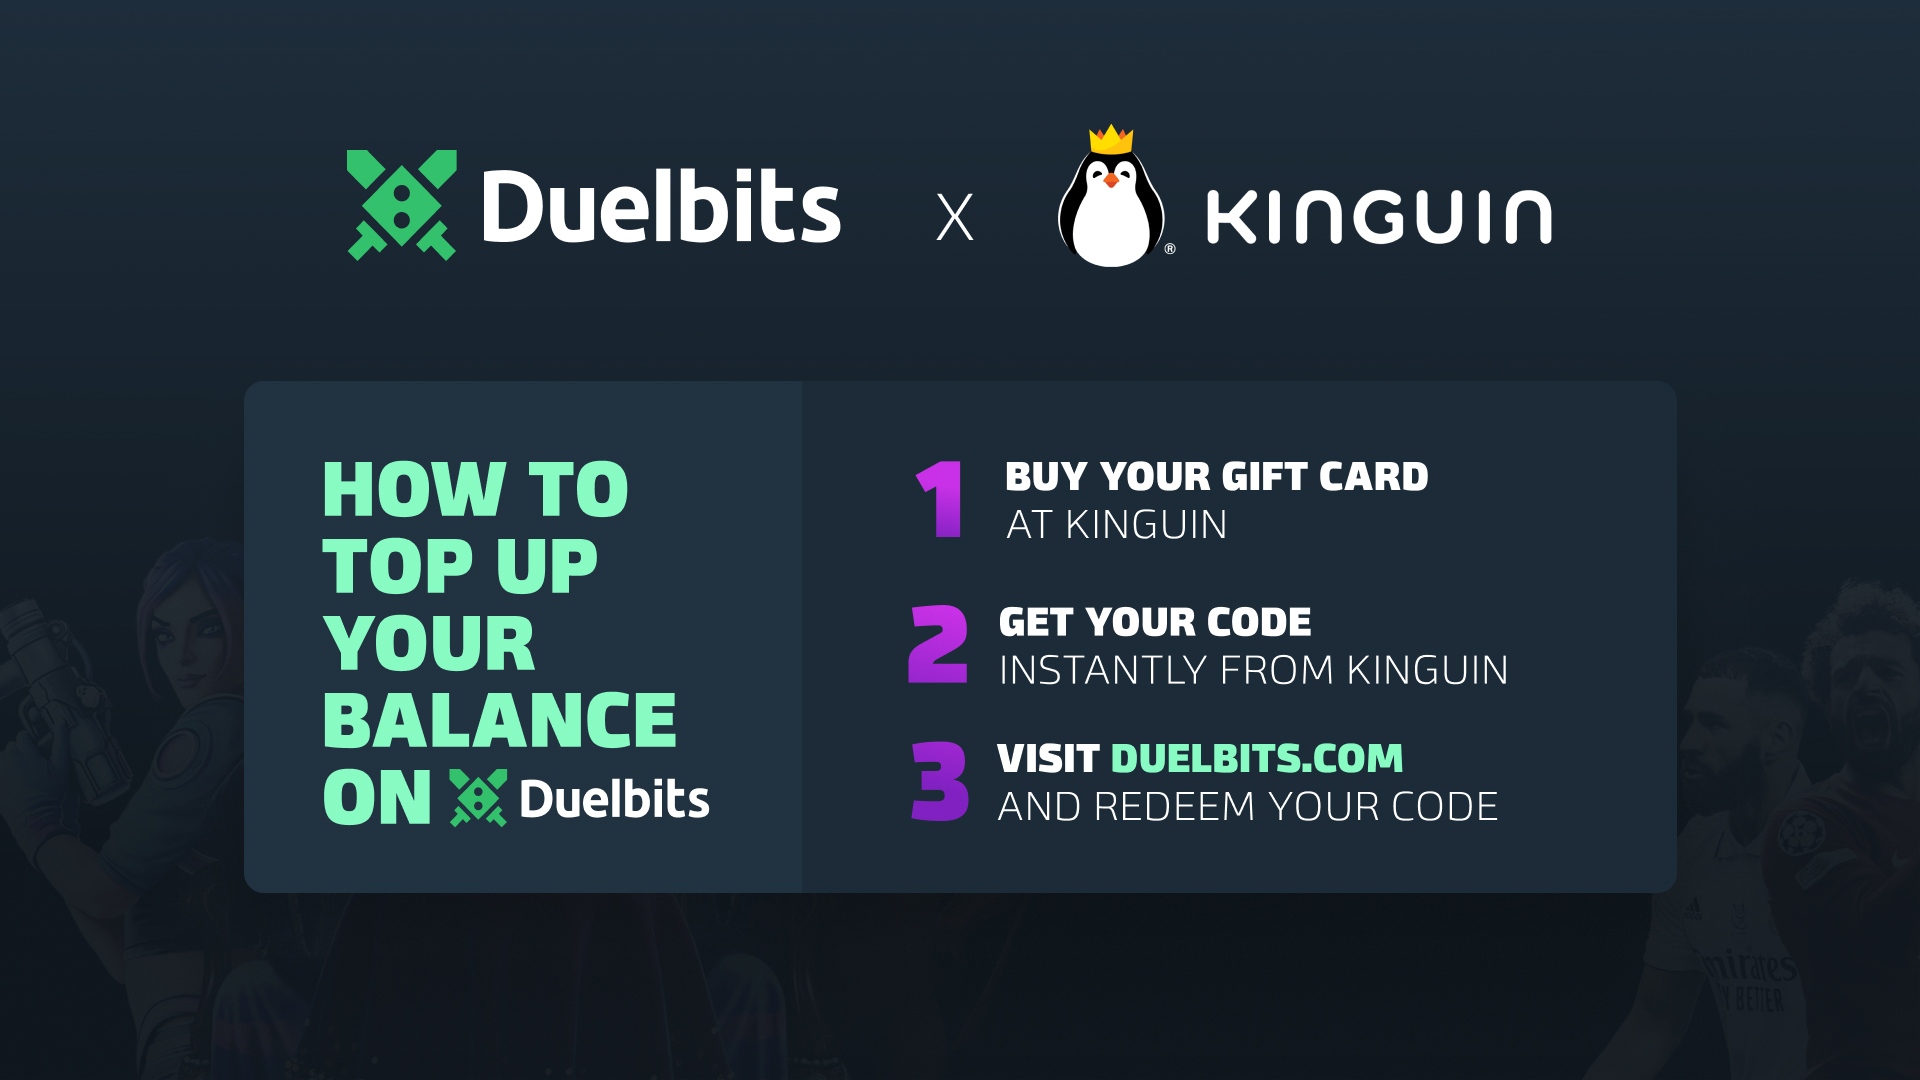 DuelBits $5 Gift Card, 6.27$